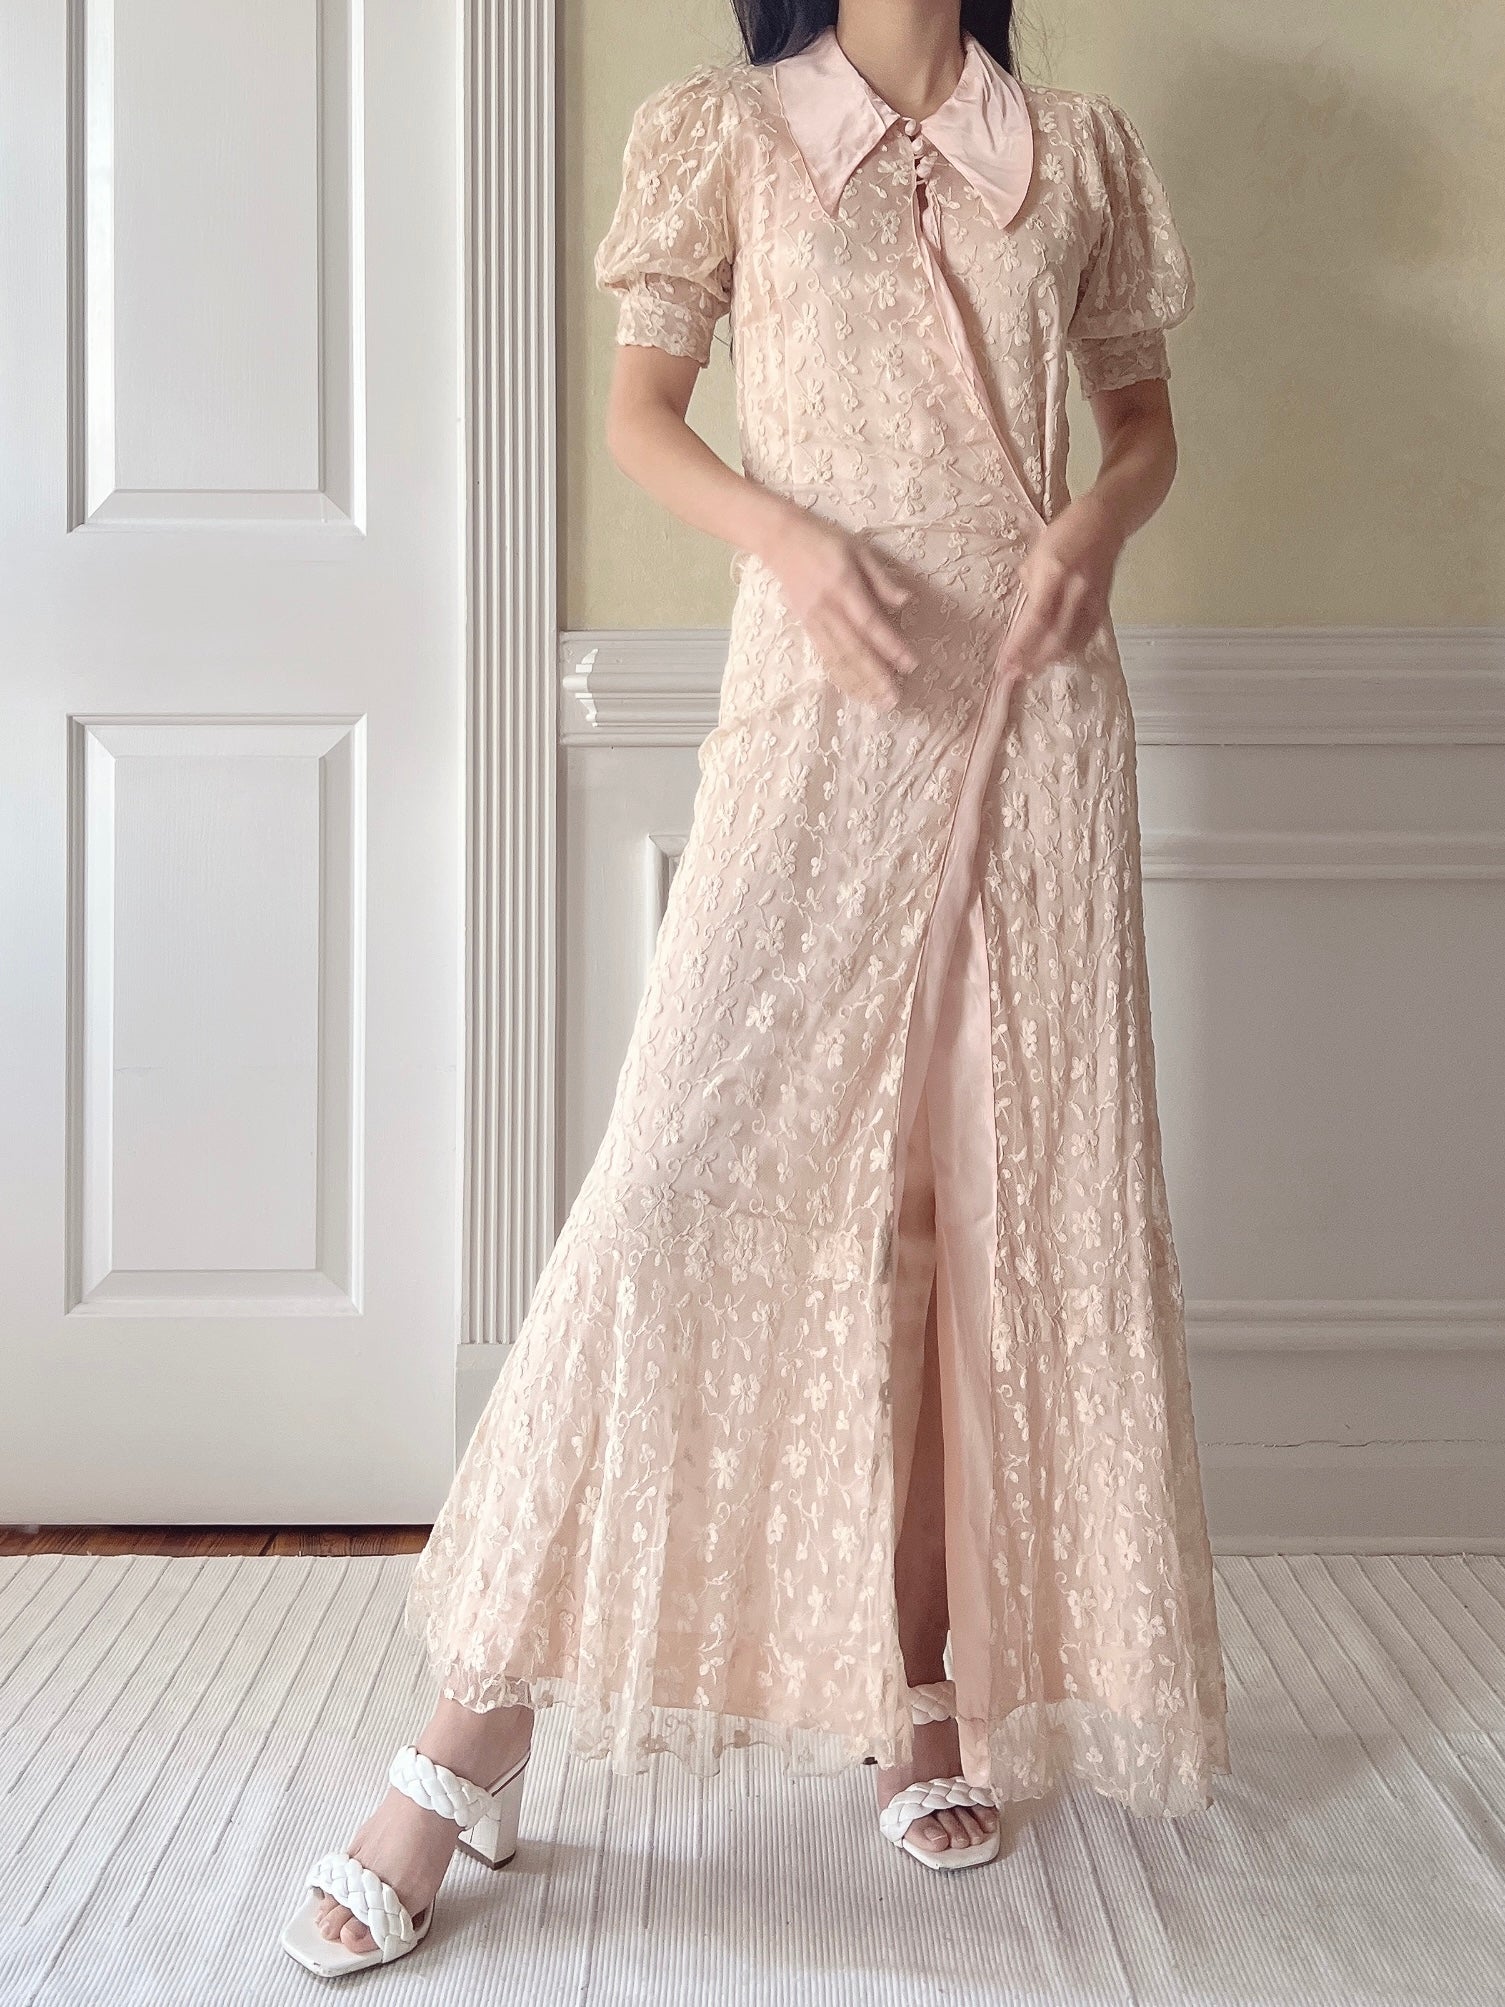 1930s Peach Needle Lace Dressing Gown  - XS/S